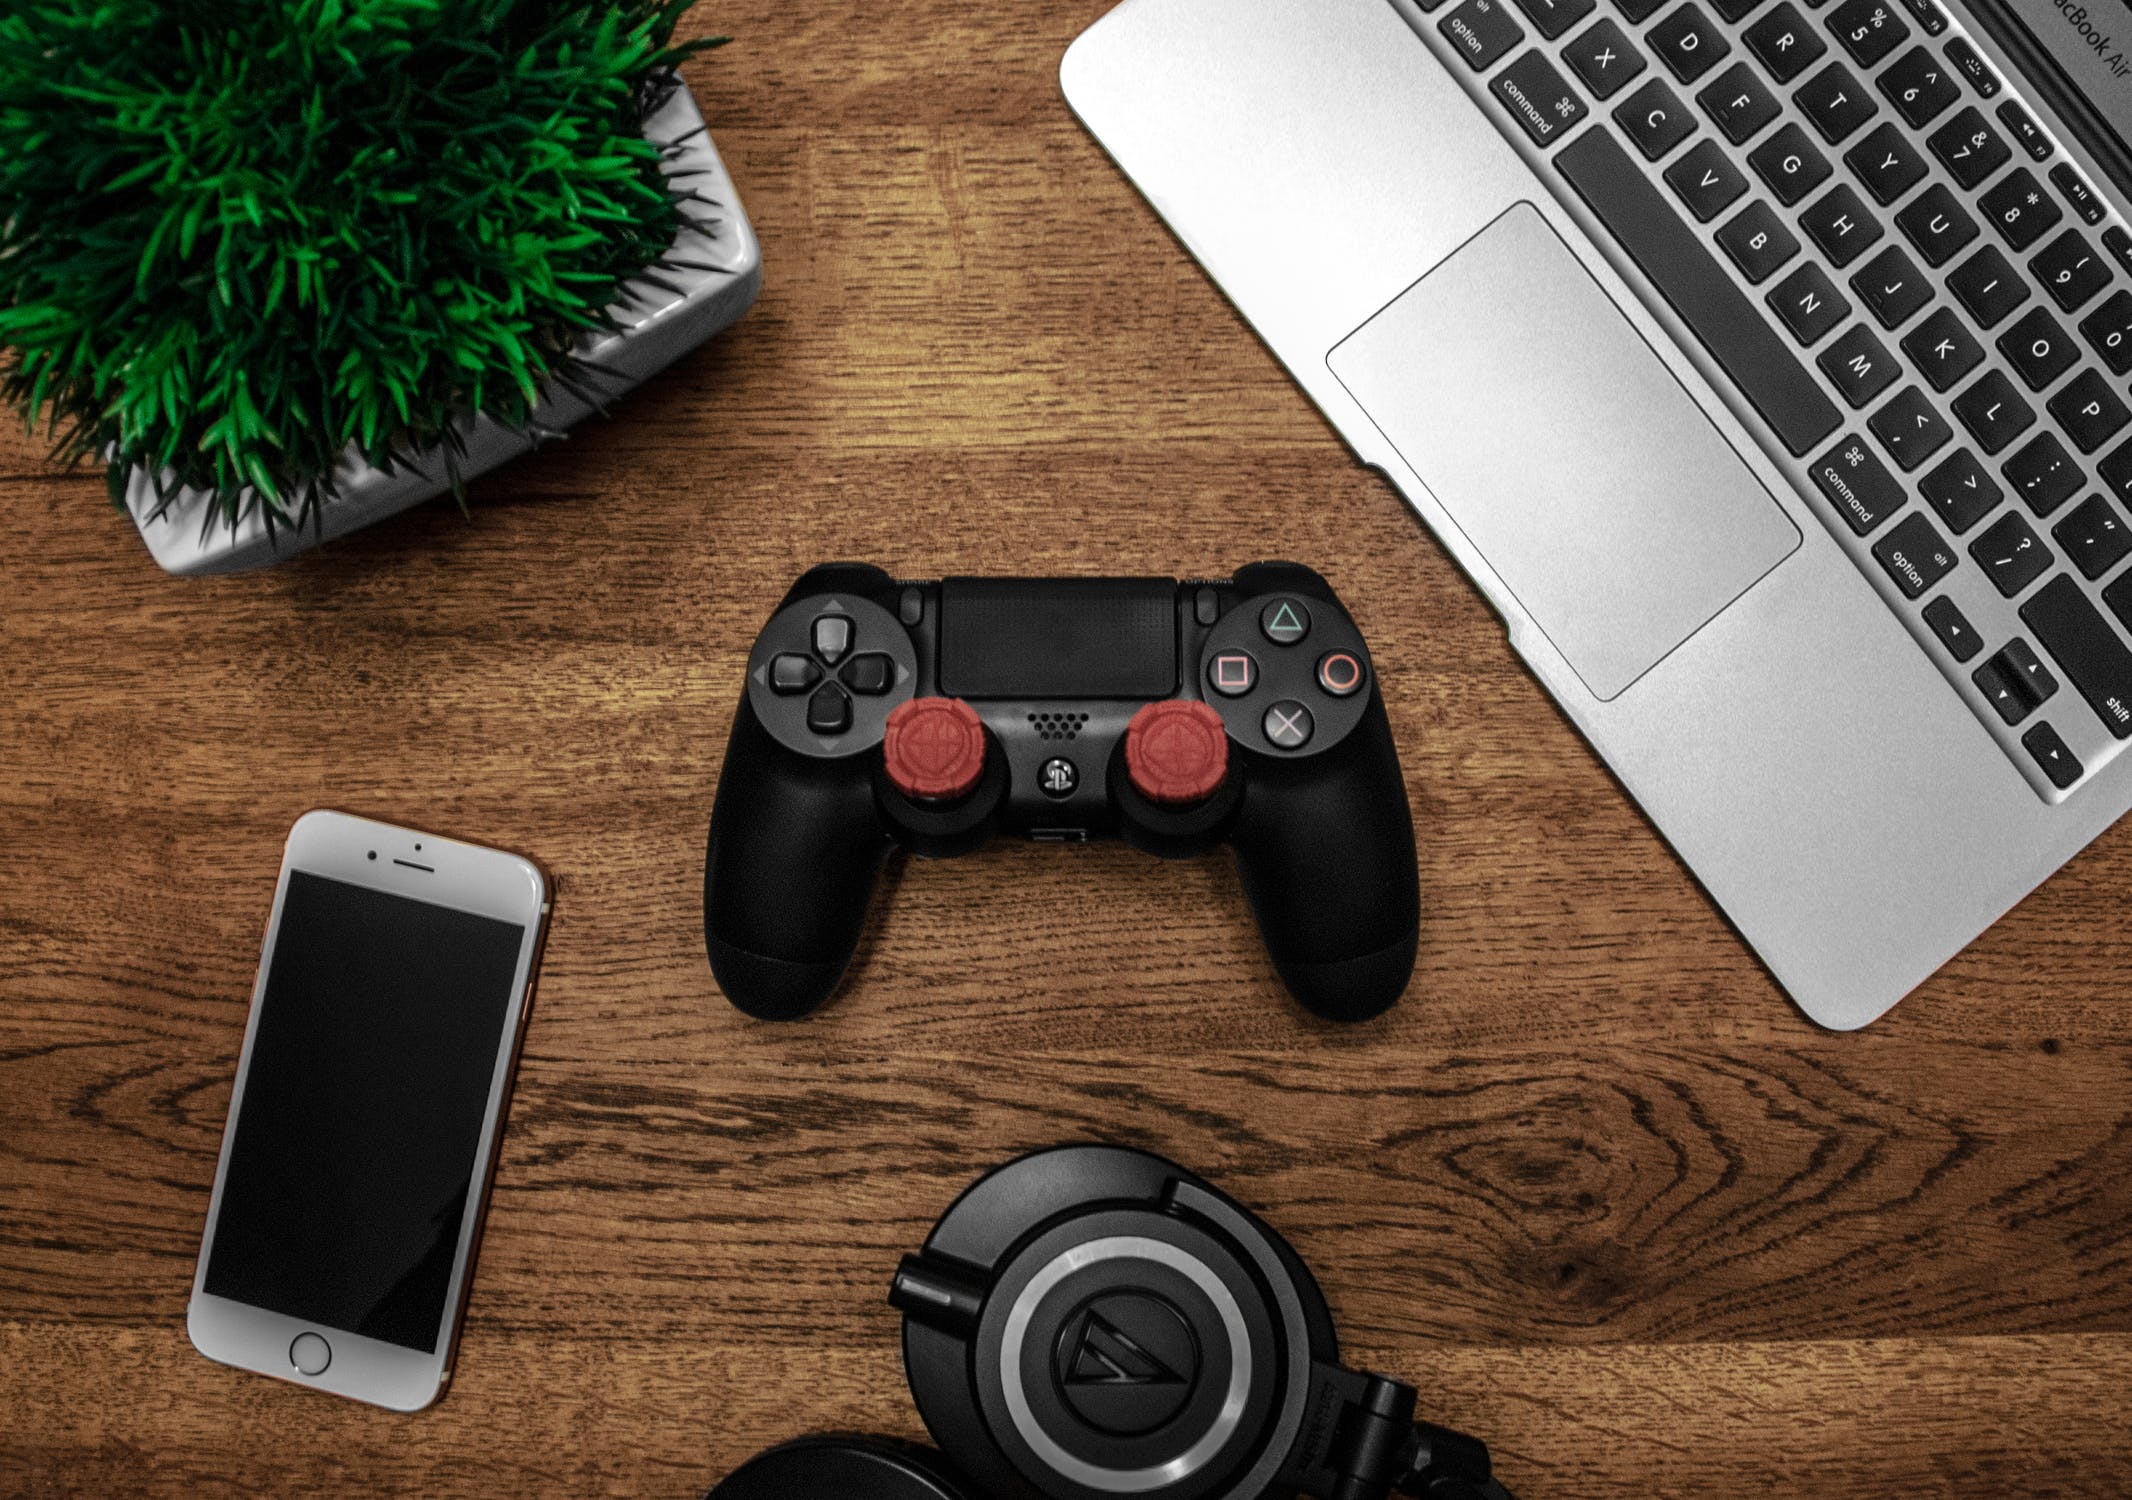 Game Development Outsourcing: What Should You Know About This?